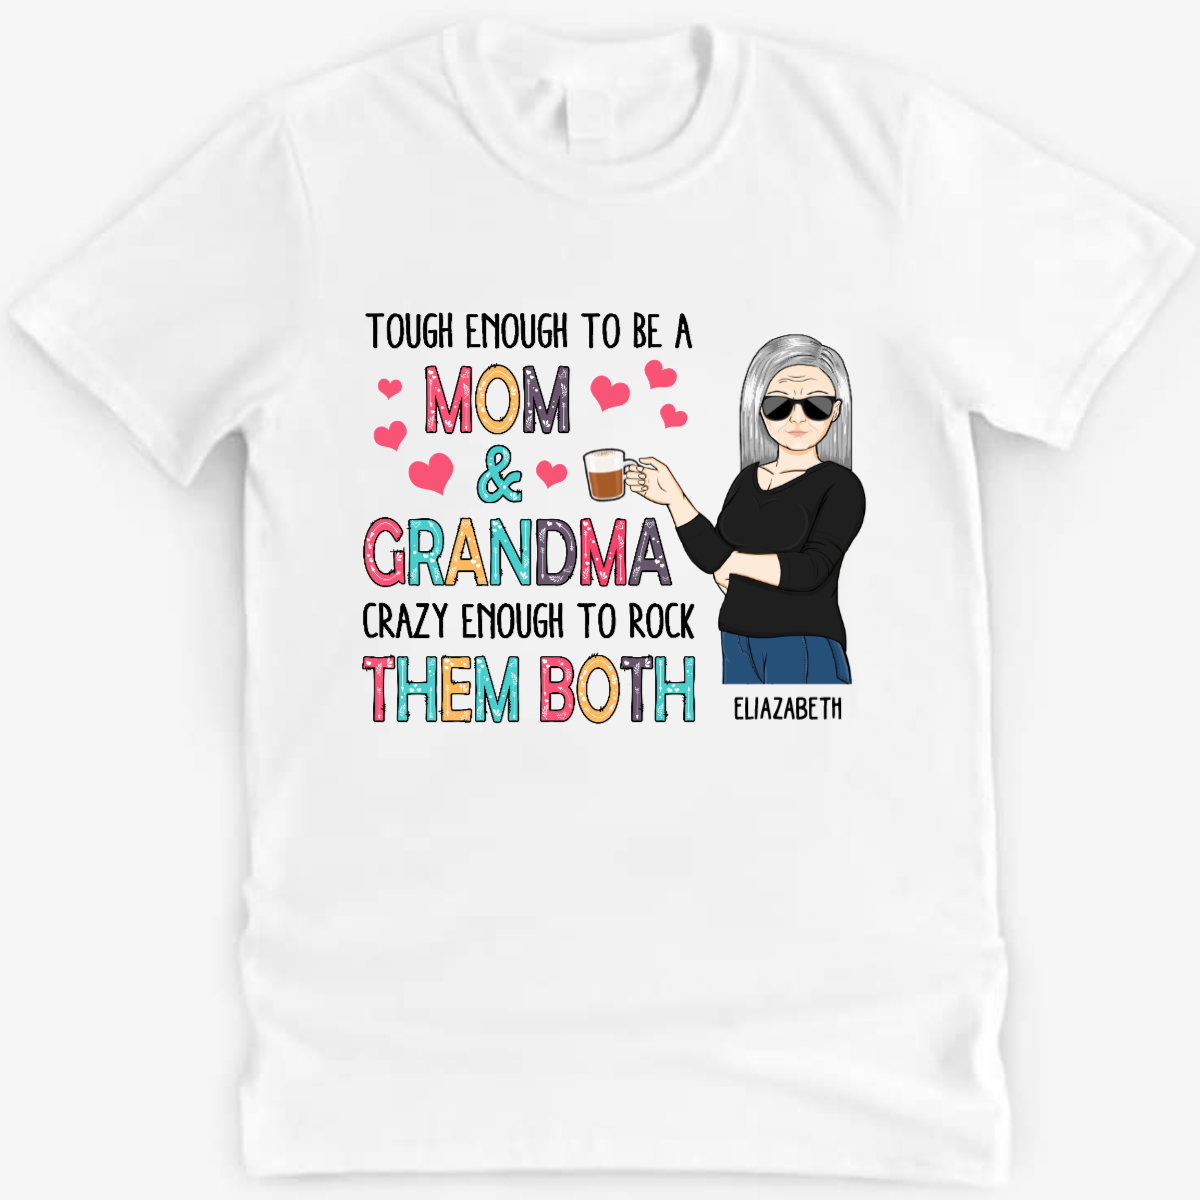 Tough Enough To Be A Mom And Grandma - Mother Gift - Personalized Custom Shirt